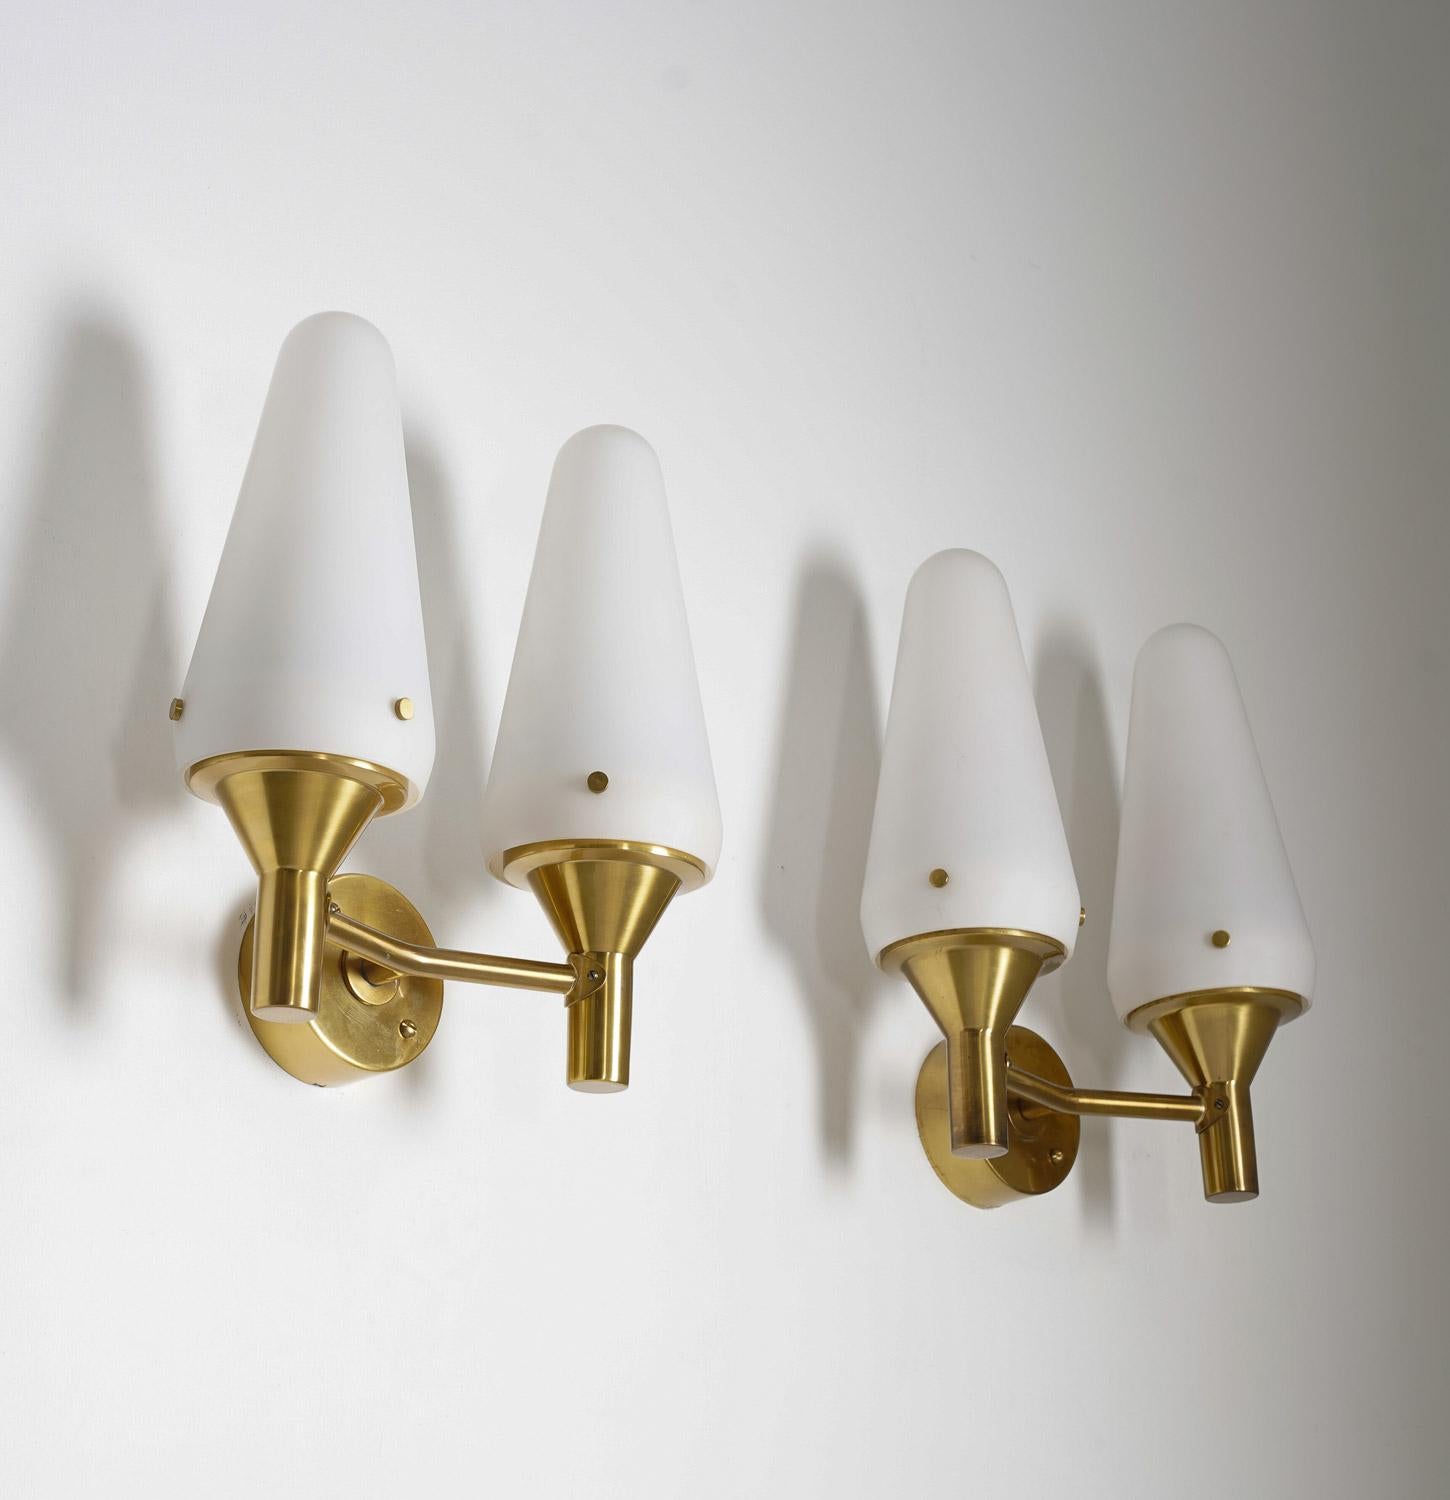 Pair of Hans-Agne Jakobsson wall lights manufactured by Hans-agne Jakobsson circa 1950.
Each lamp features two light sources, hidden by a large frosted opaline glass shade. The shades are kept in place by brass screws. 

Condition: Very good